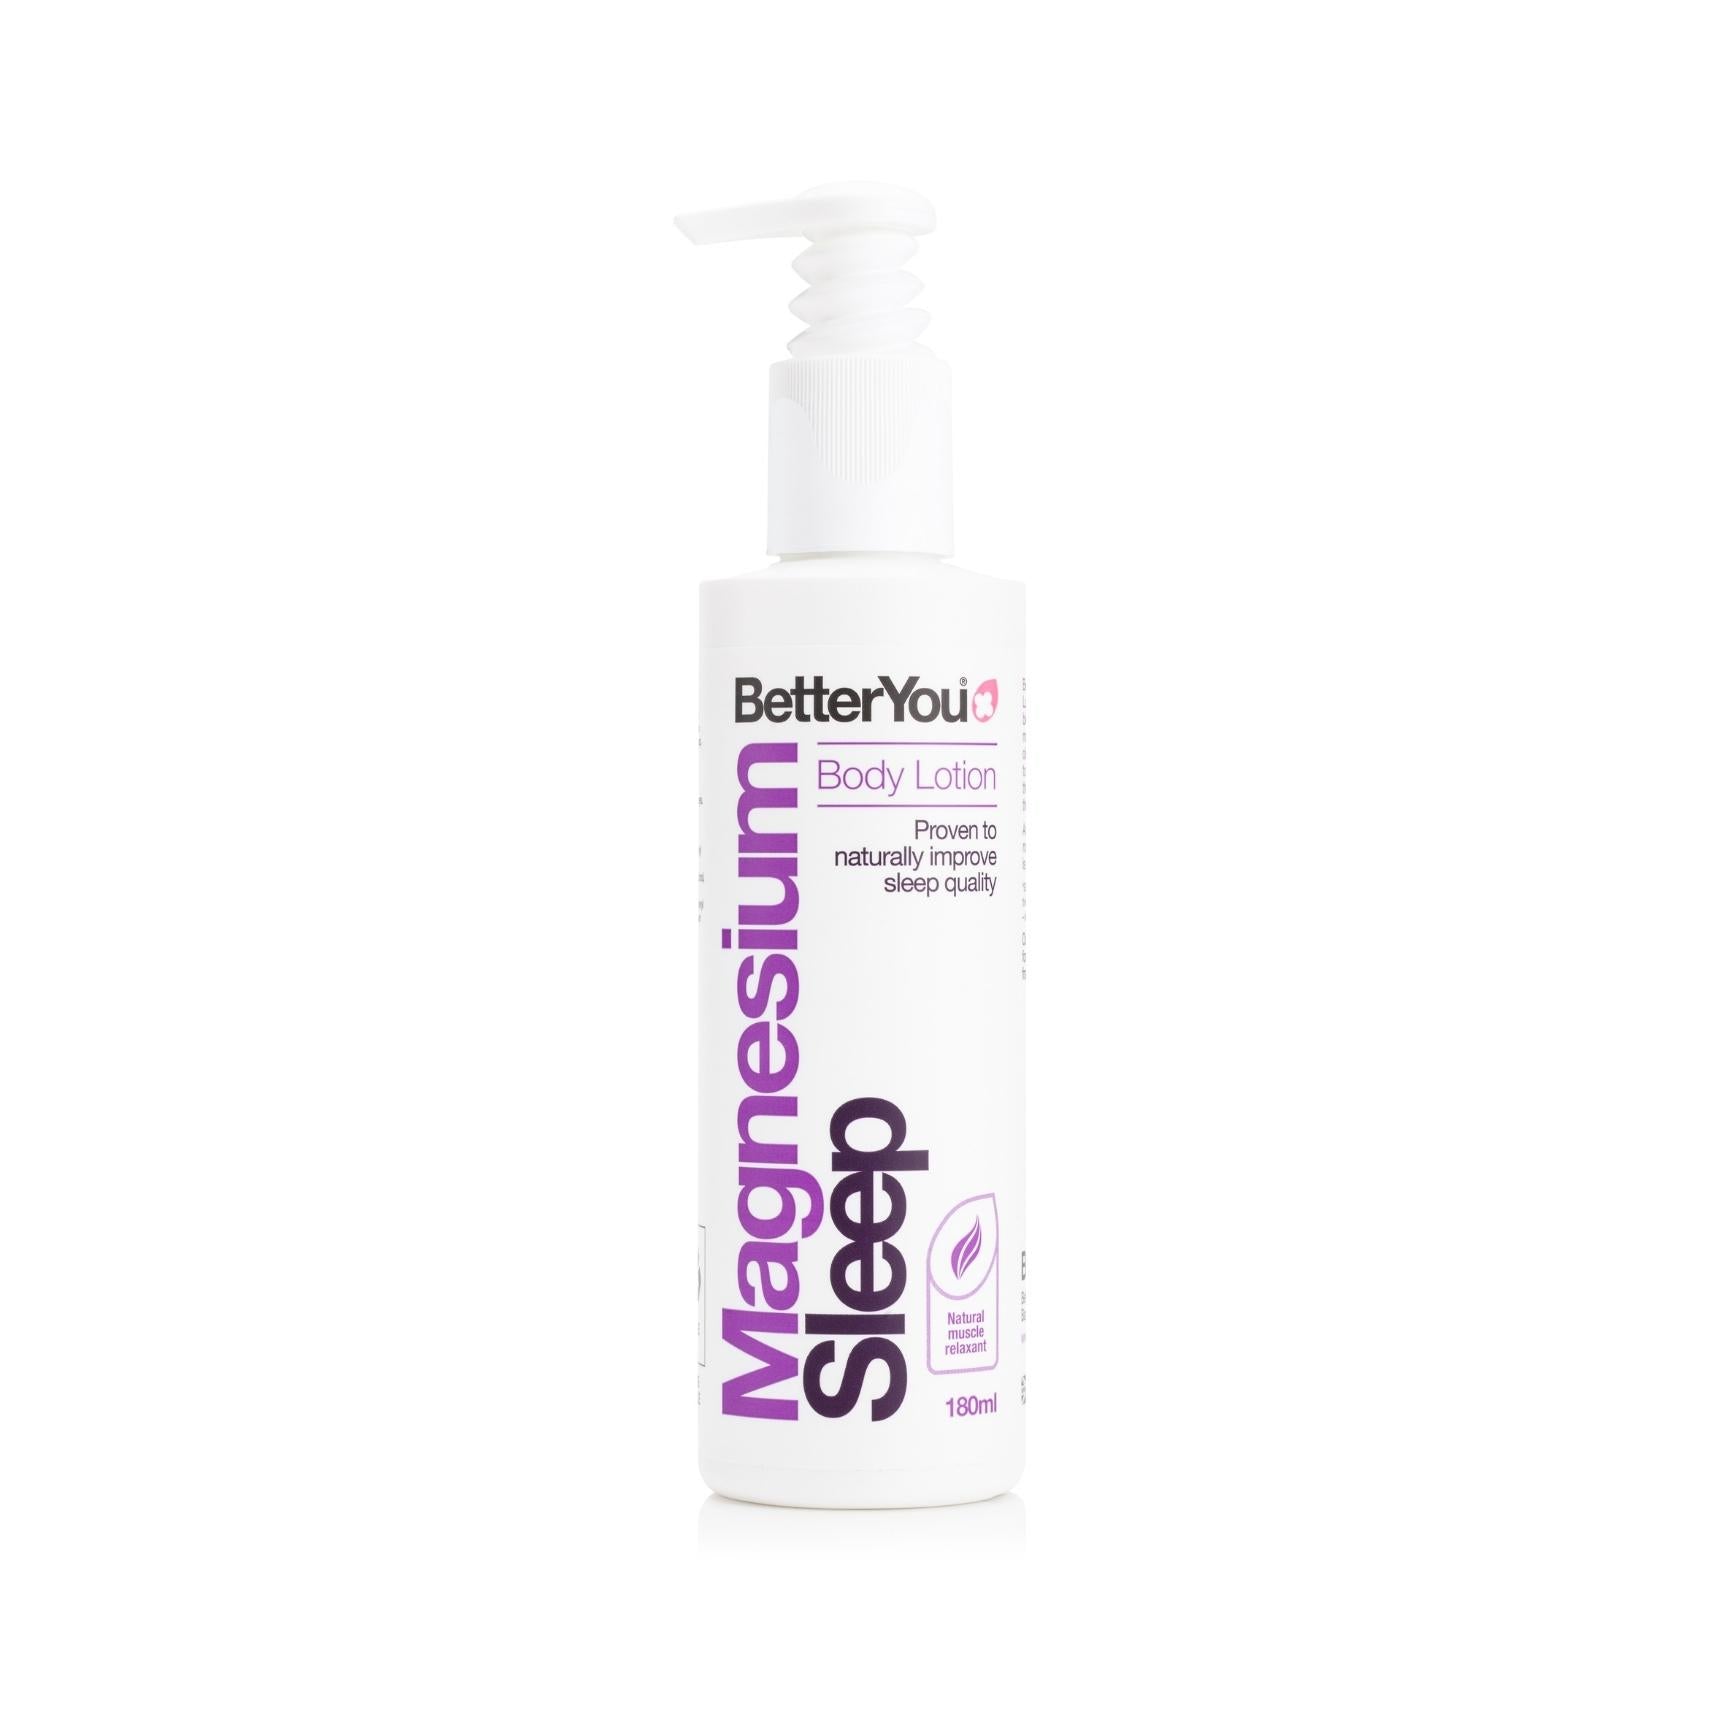 BetterYou Magnesium Body Lotion Review